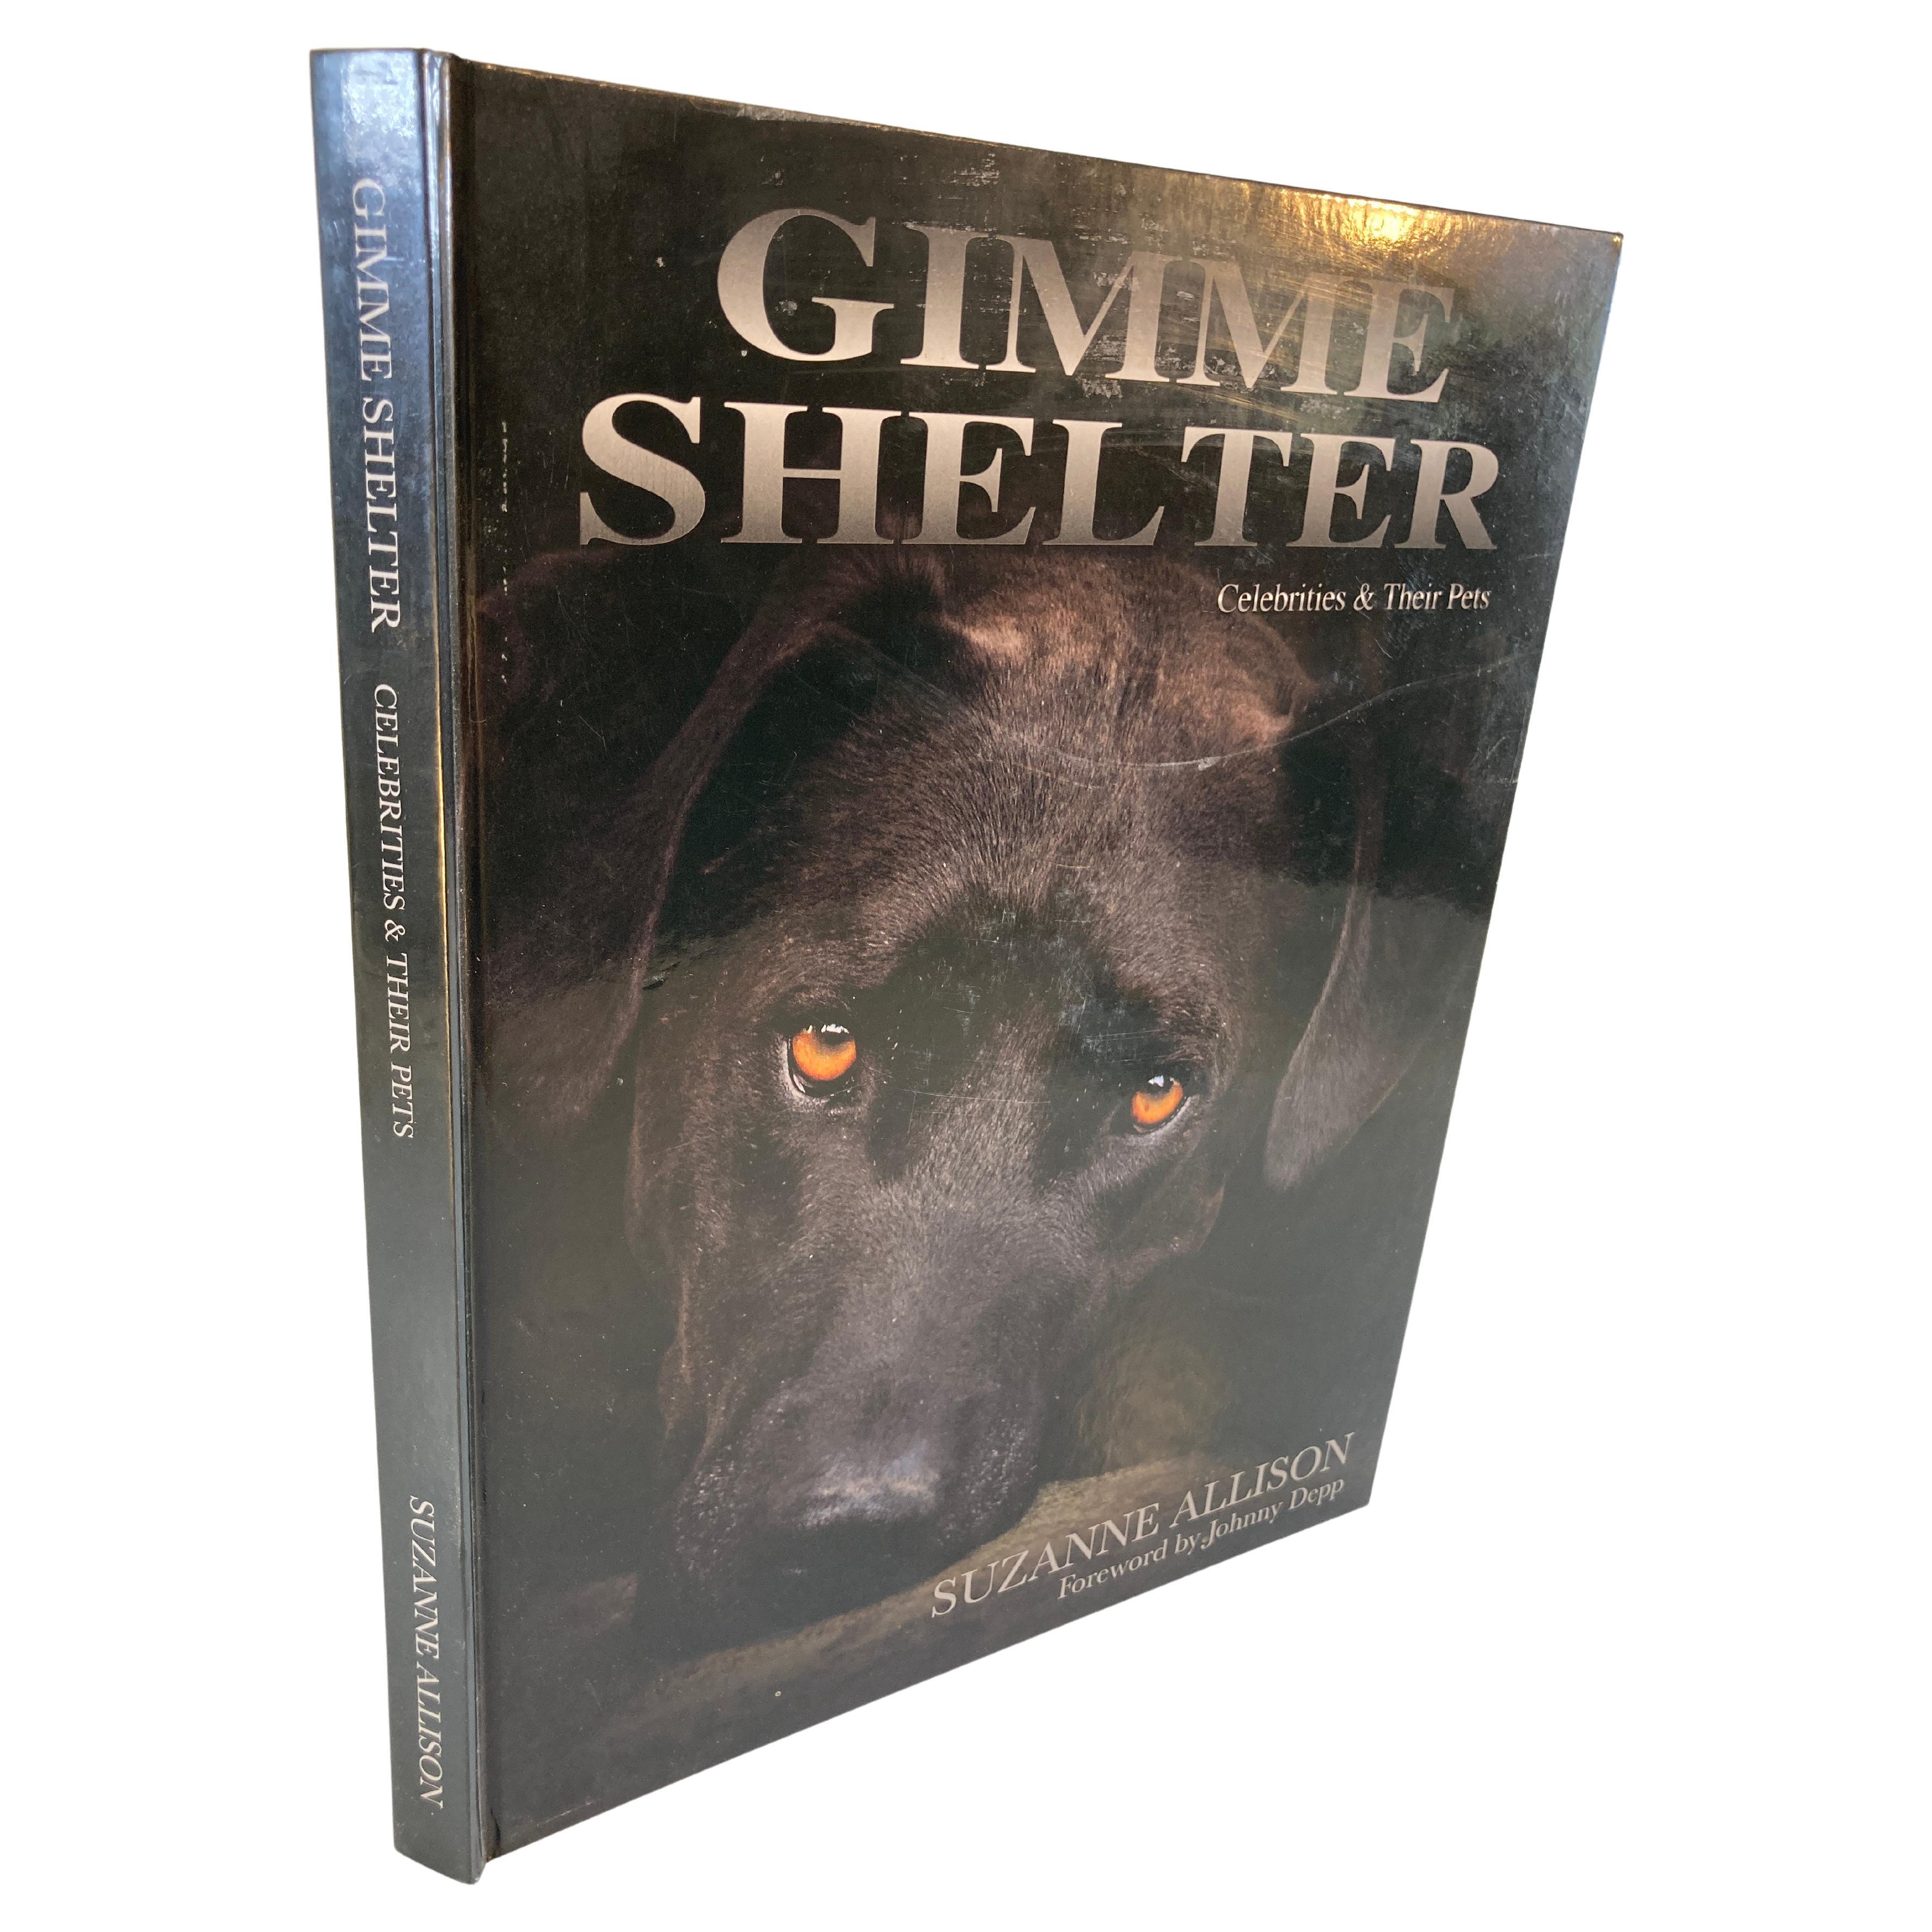 Gimme Shelter Celebrities & Their Pets by Suzanne Allison